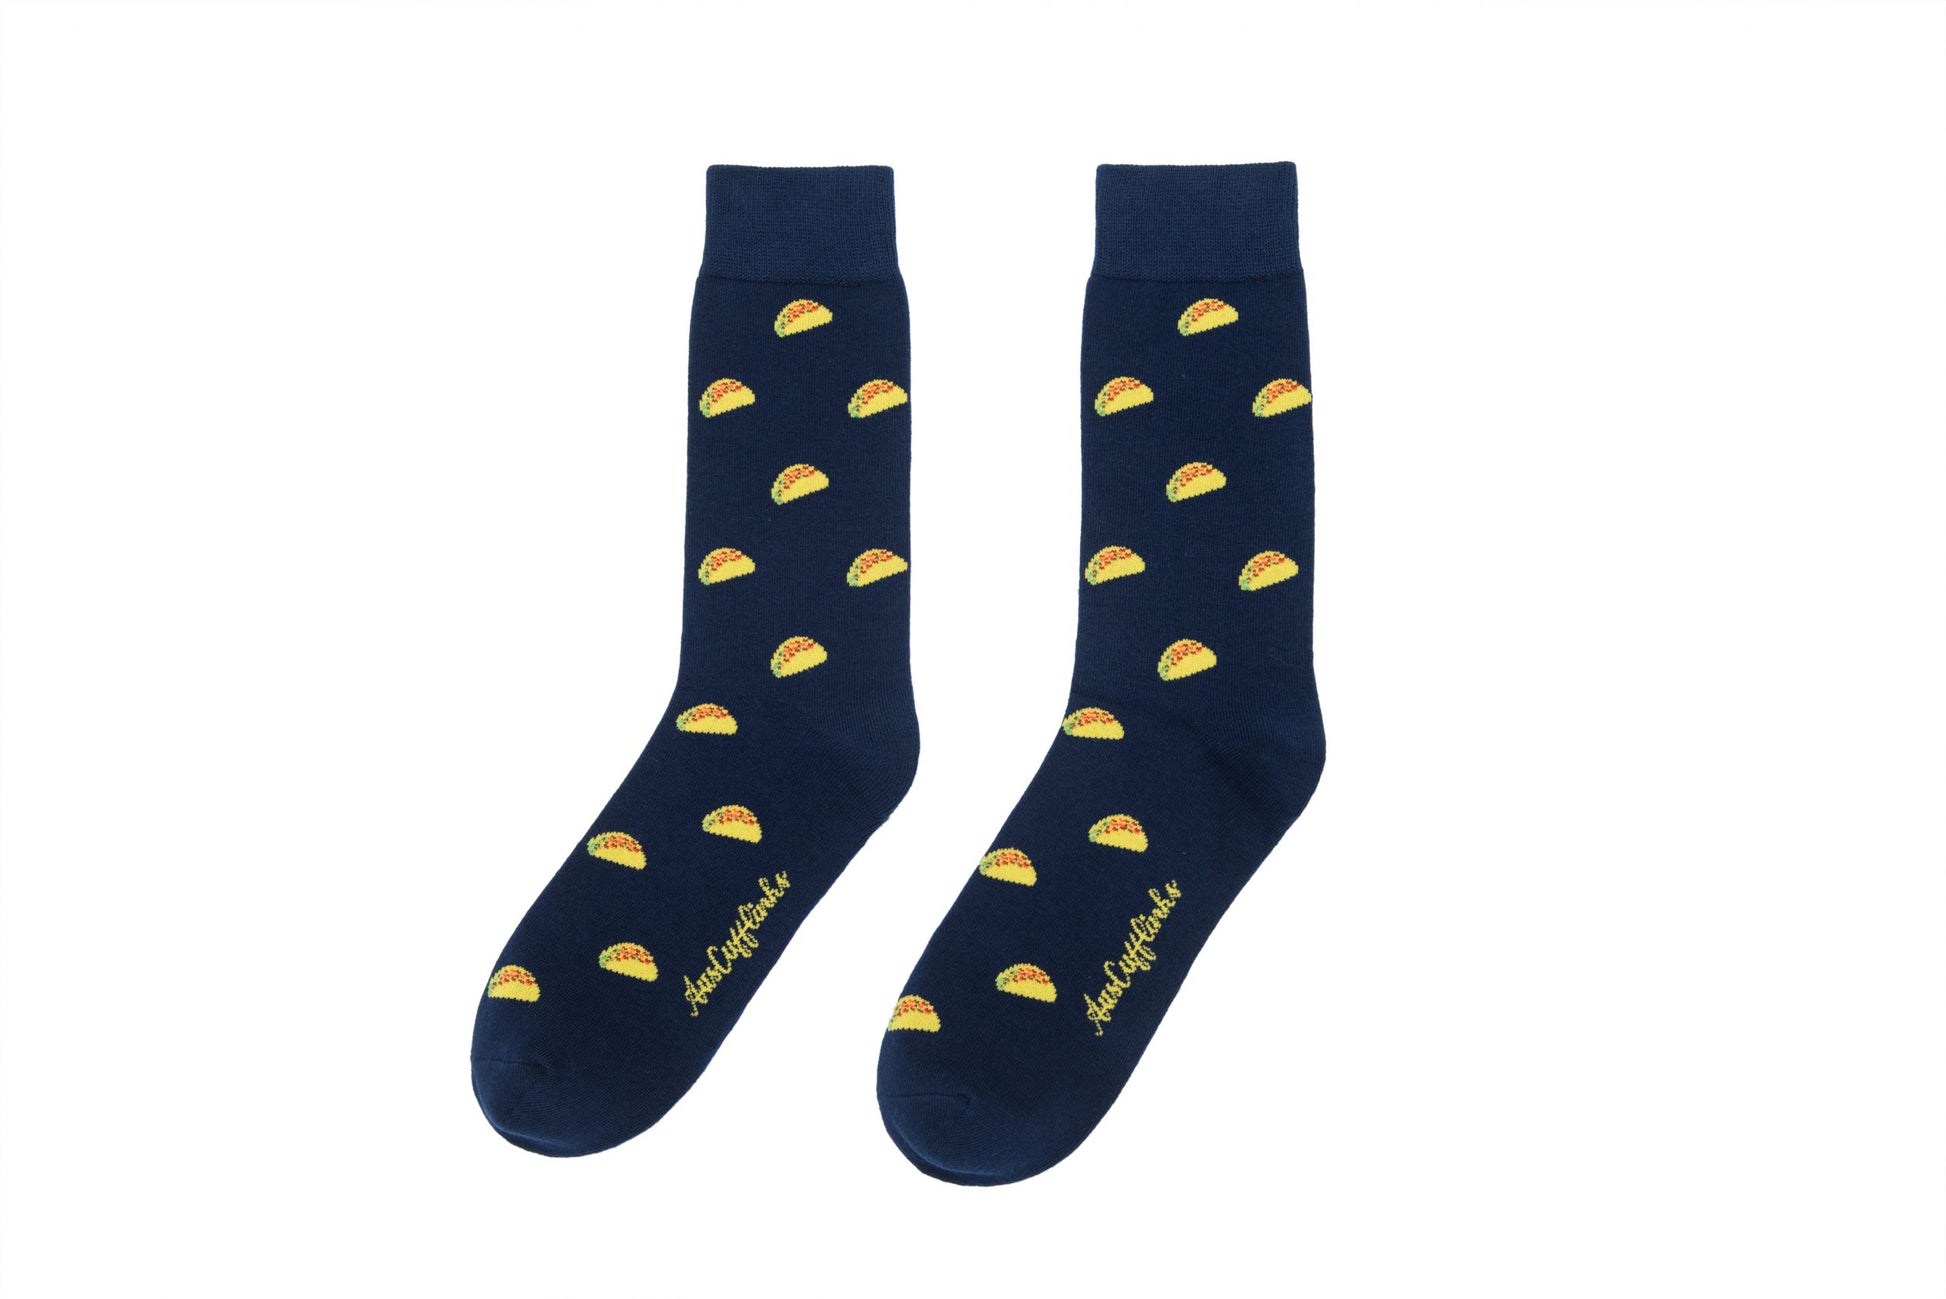 A pair of navy blue Taco Socks with a pattern of flavor-packed yellow hamburgers and the word "hamburger" written at the bottom, adding a sense of playfulness.